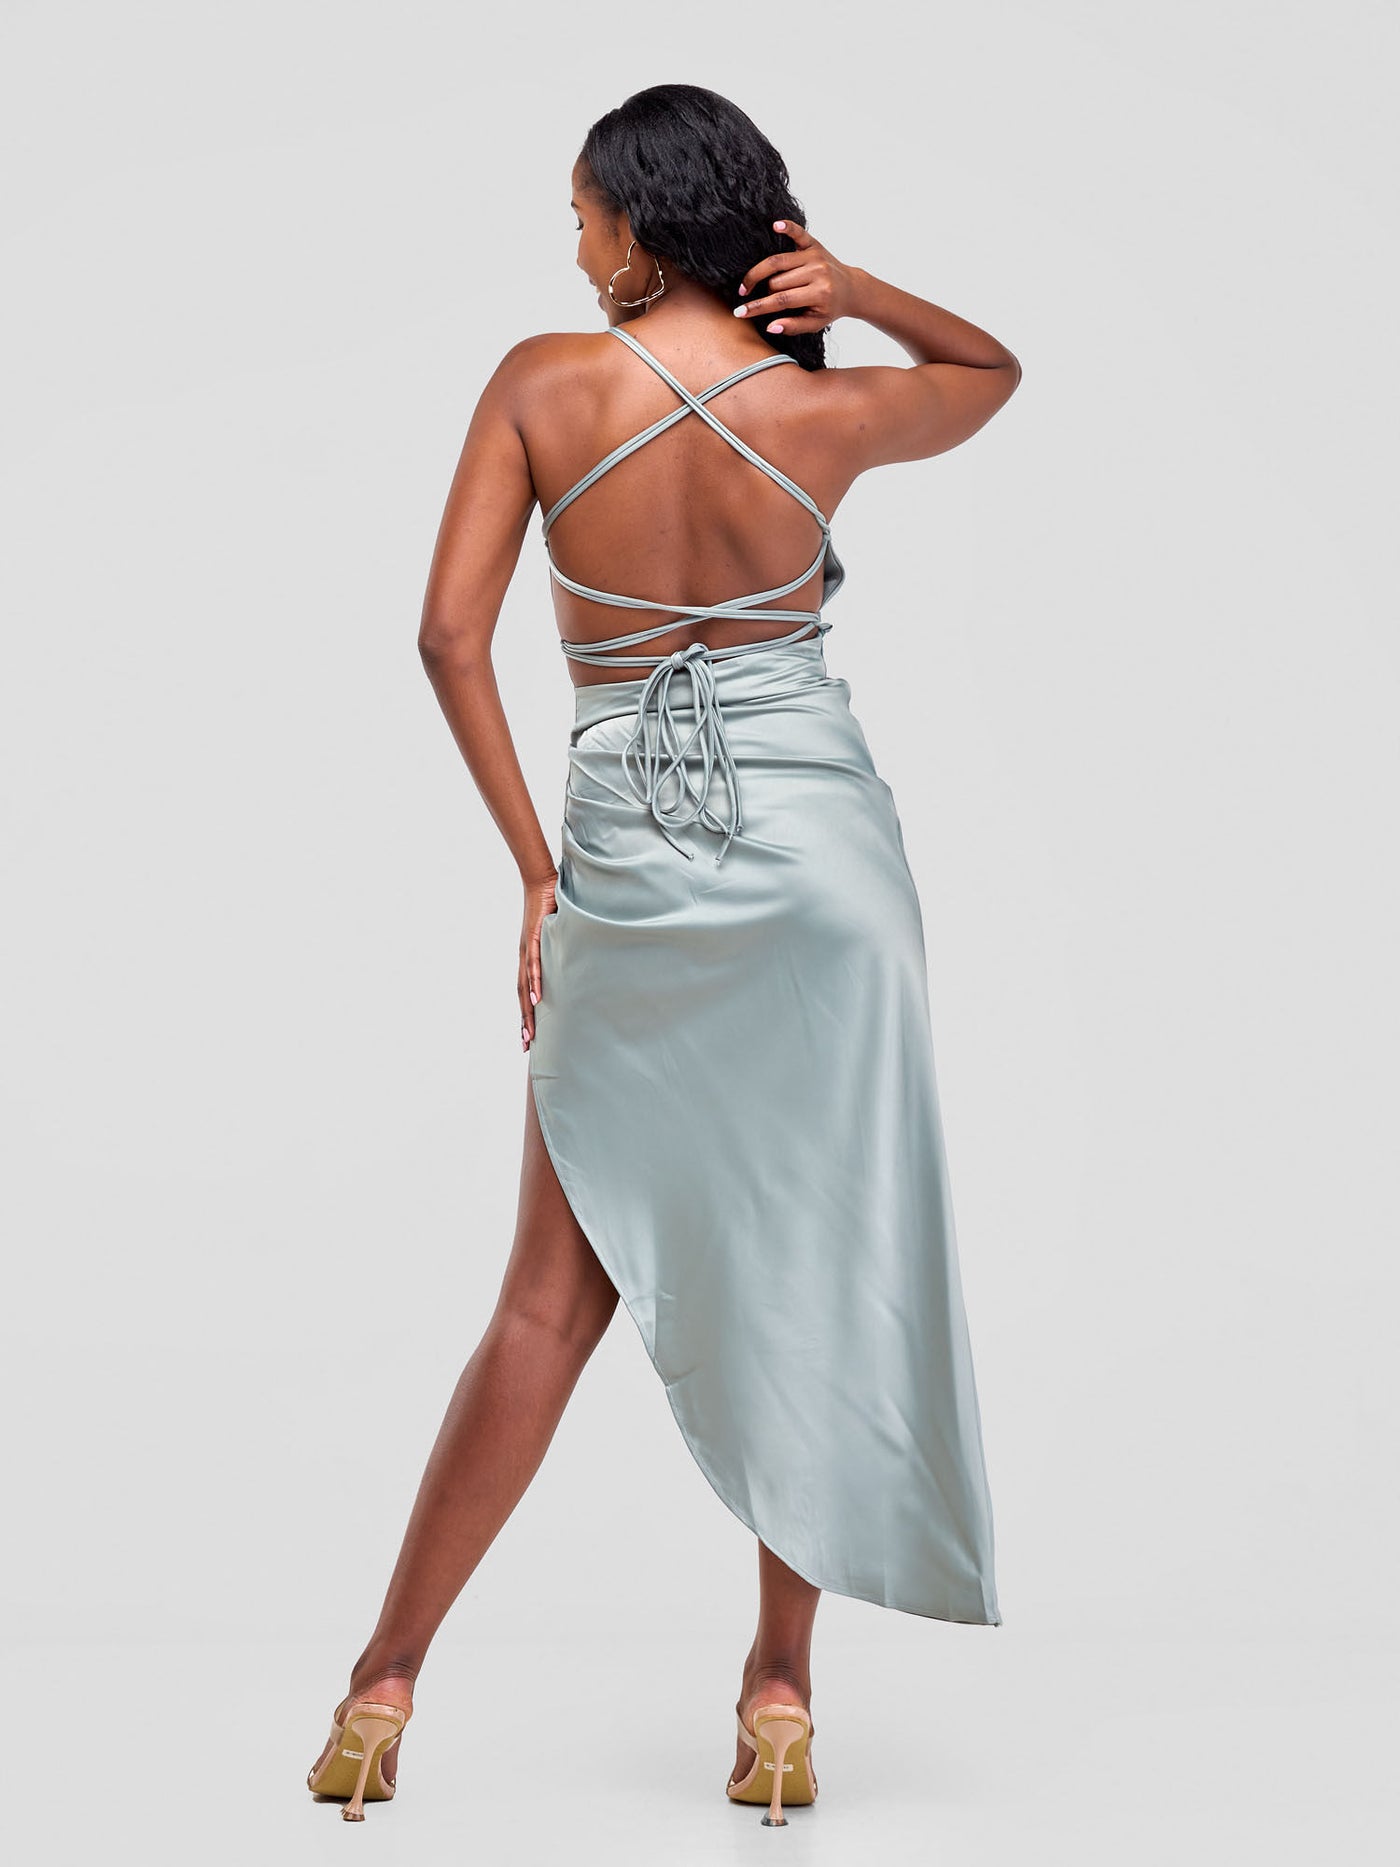 Lola Backless Strappy Satin Dress  With High Side Slit - Green